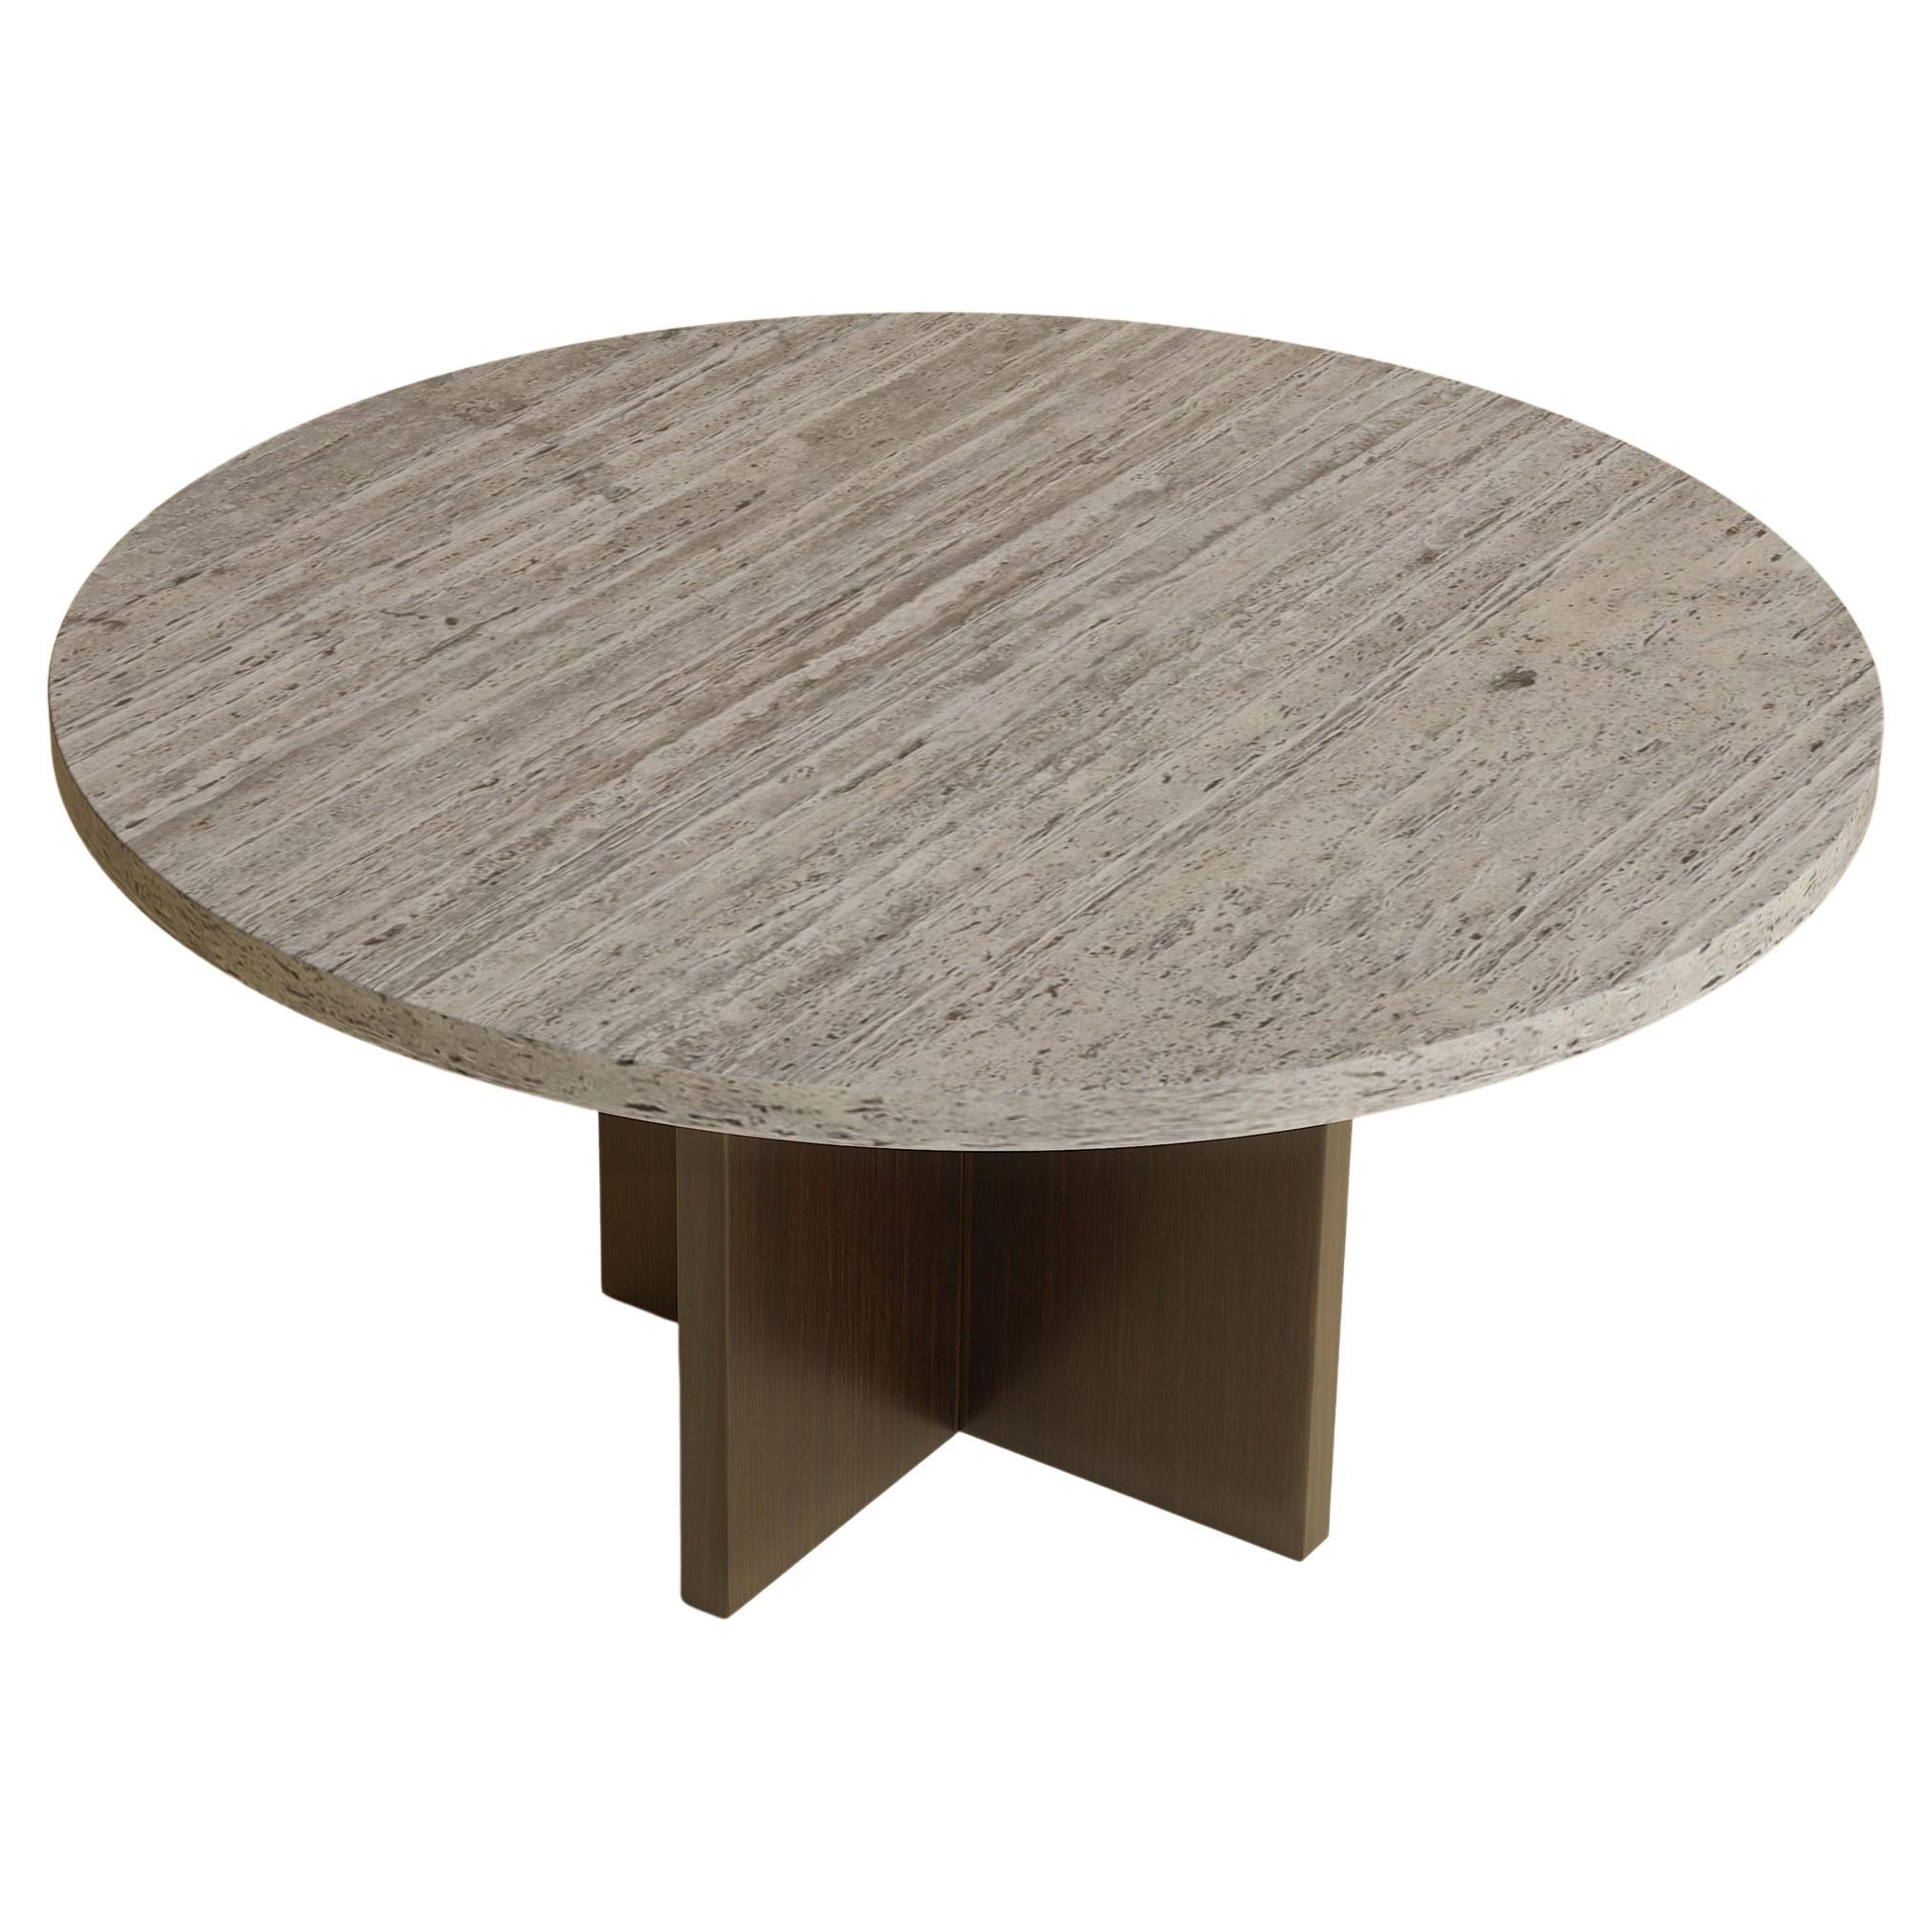 Titanium Travertine Marble Round Coffee Table, Made in Italy